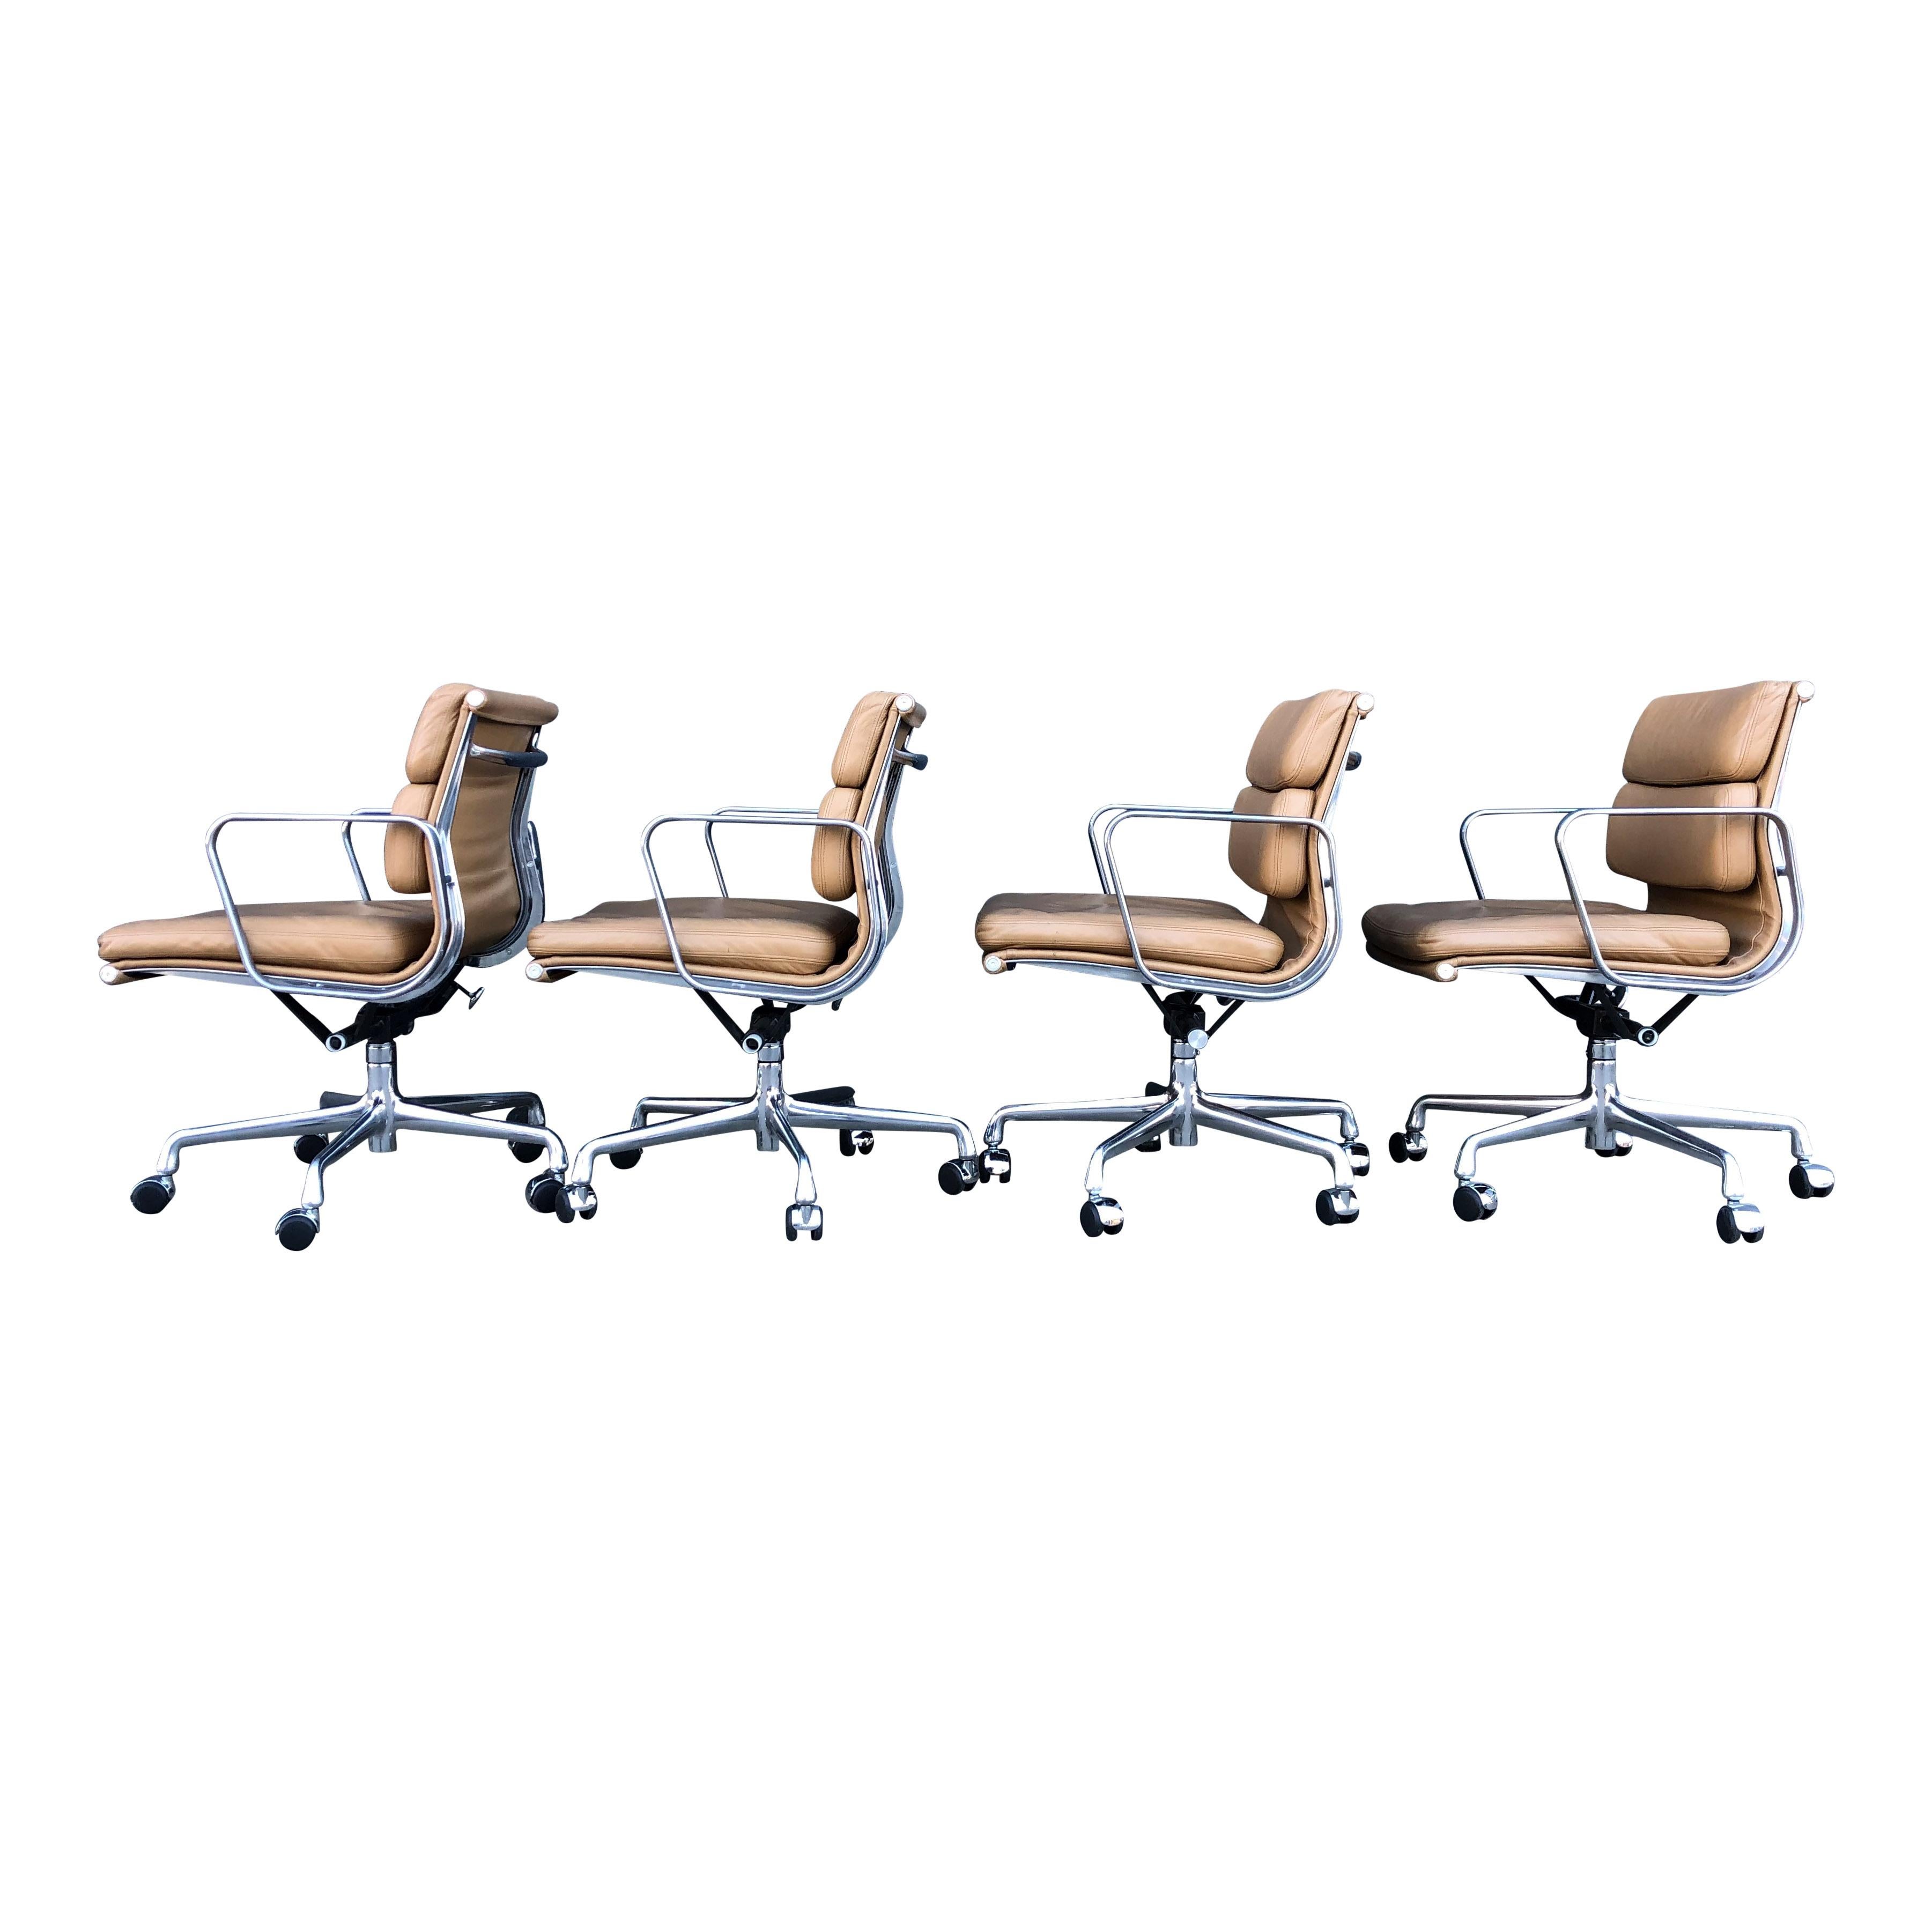 For your consideration at up to four authentic Eames for Herman Miller vintage soft pad chairs in brown leather with low backs. These authentic examples are icons of Mid-Century Modern design. The chairs, part of the Eames Aluminum group designed